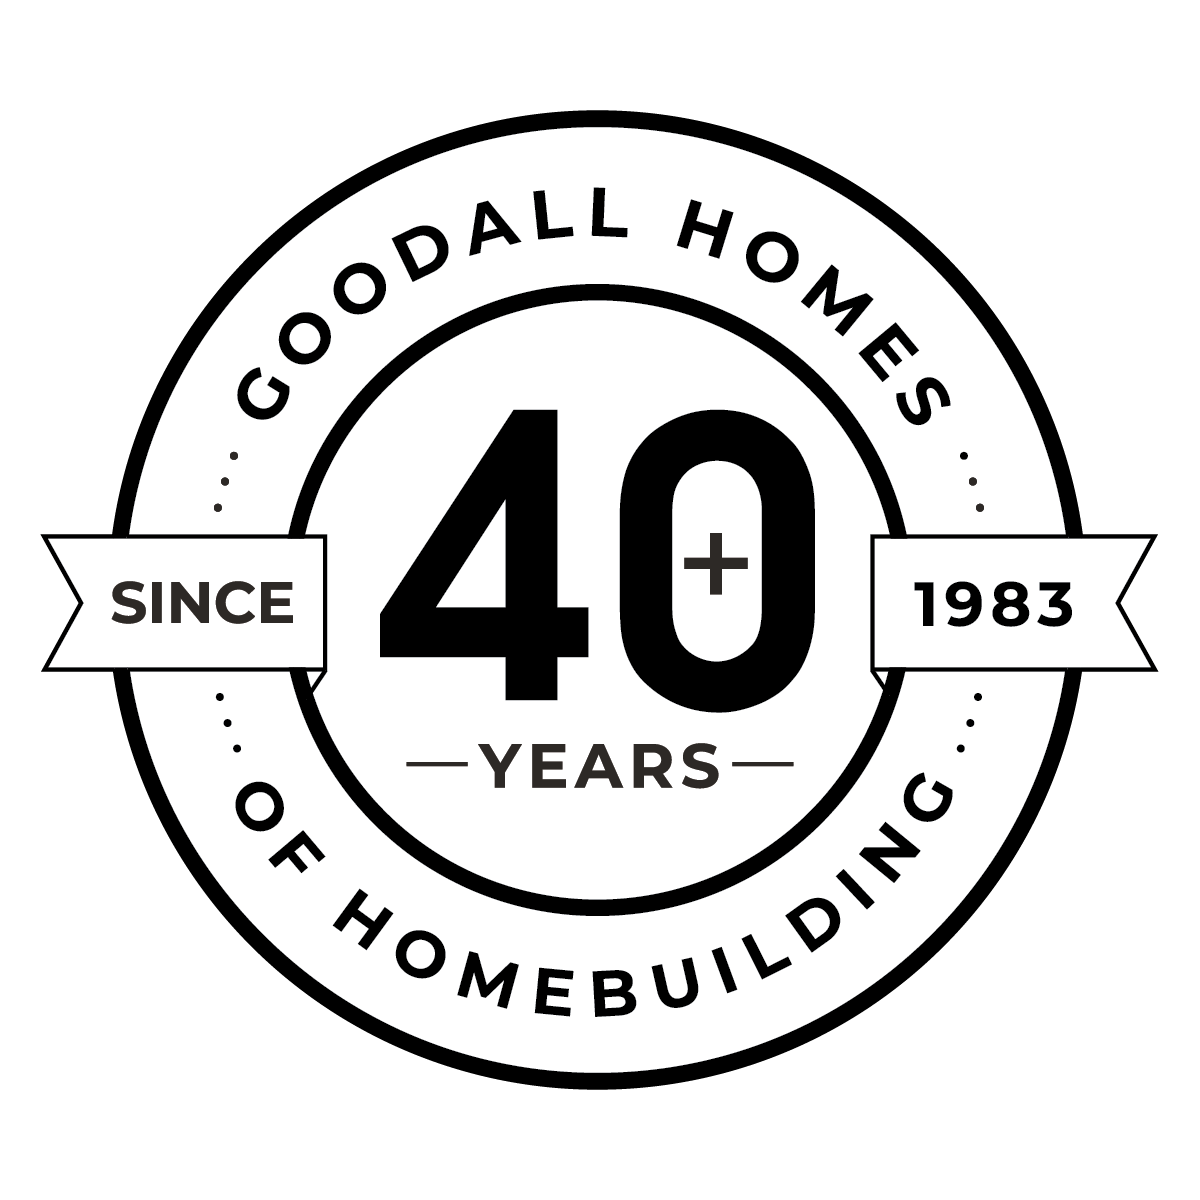 40 Years of Homebuilding Experience